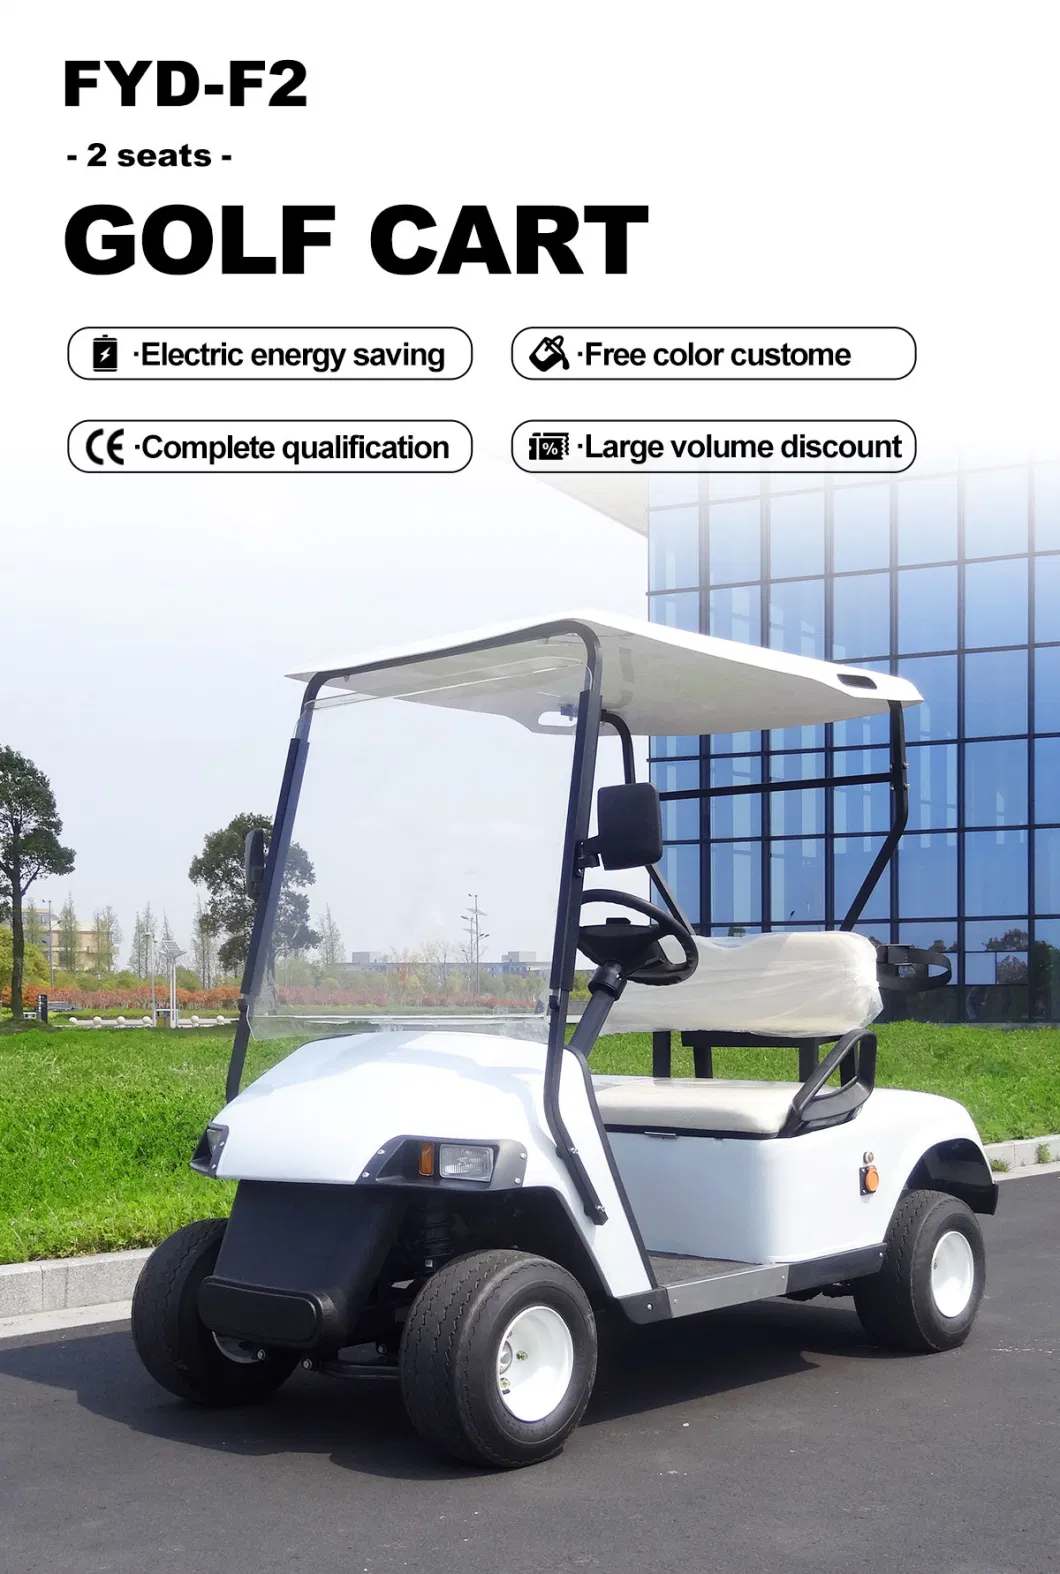 Fast Performance Utility Sightseeing Small Electric Car Mini Leisure Motorized Lsv Golf Cart Shuttle Transfer for Sale